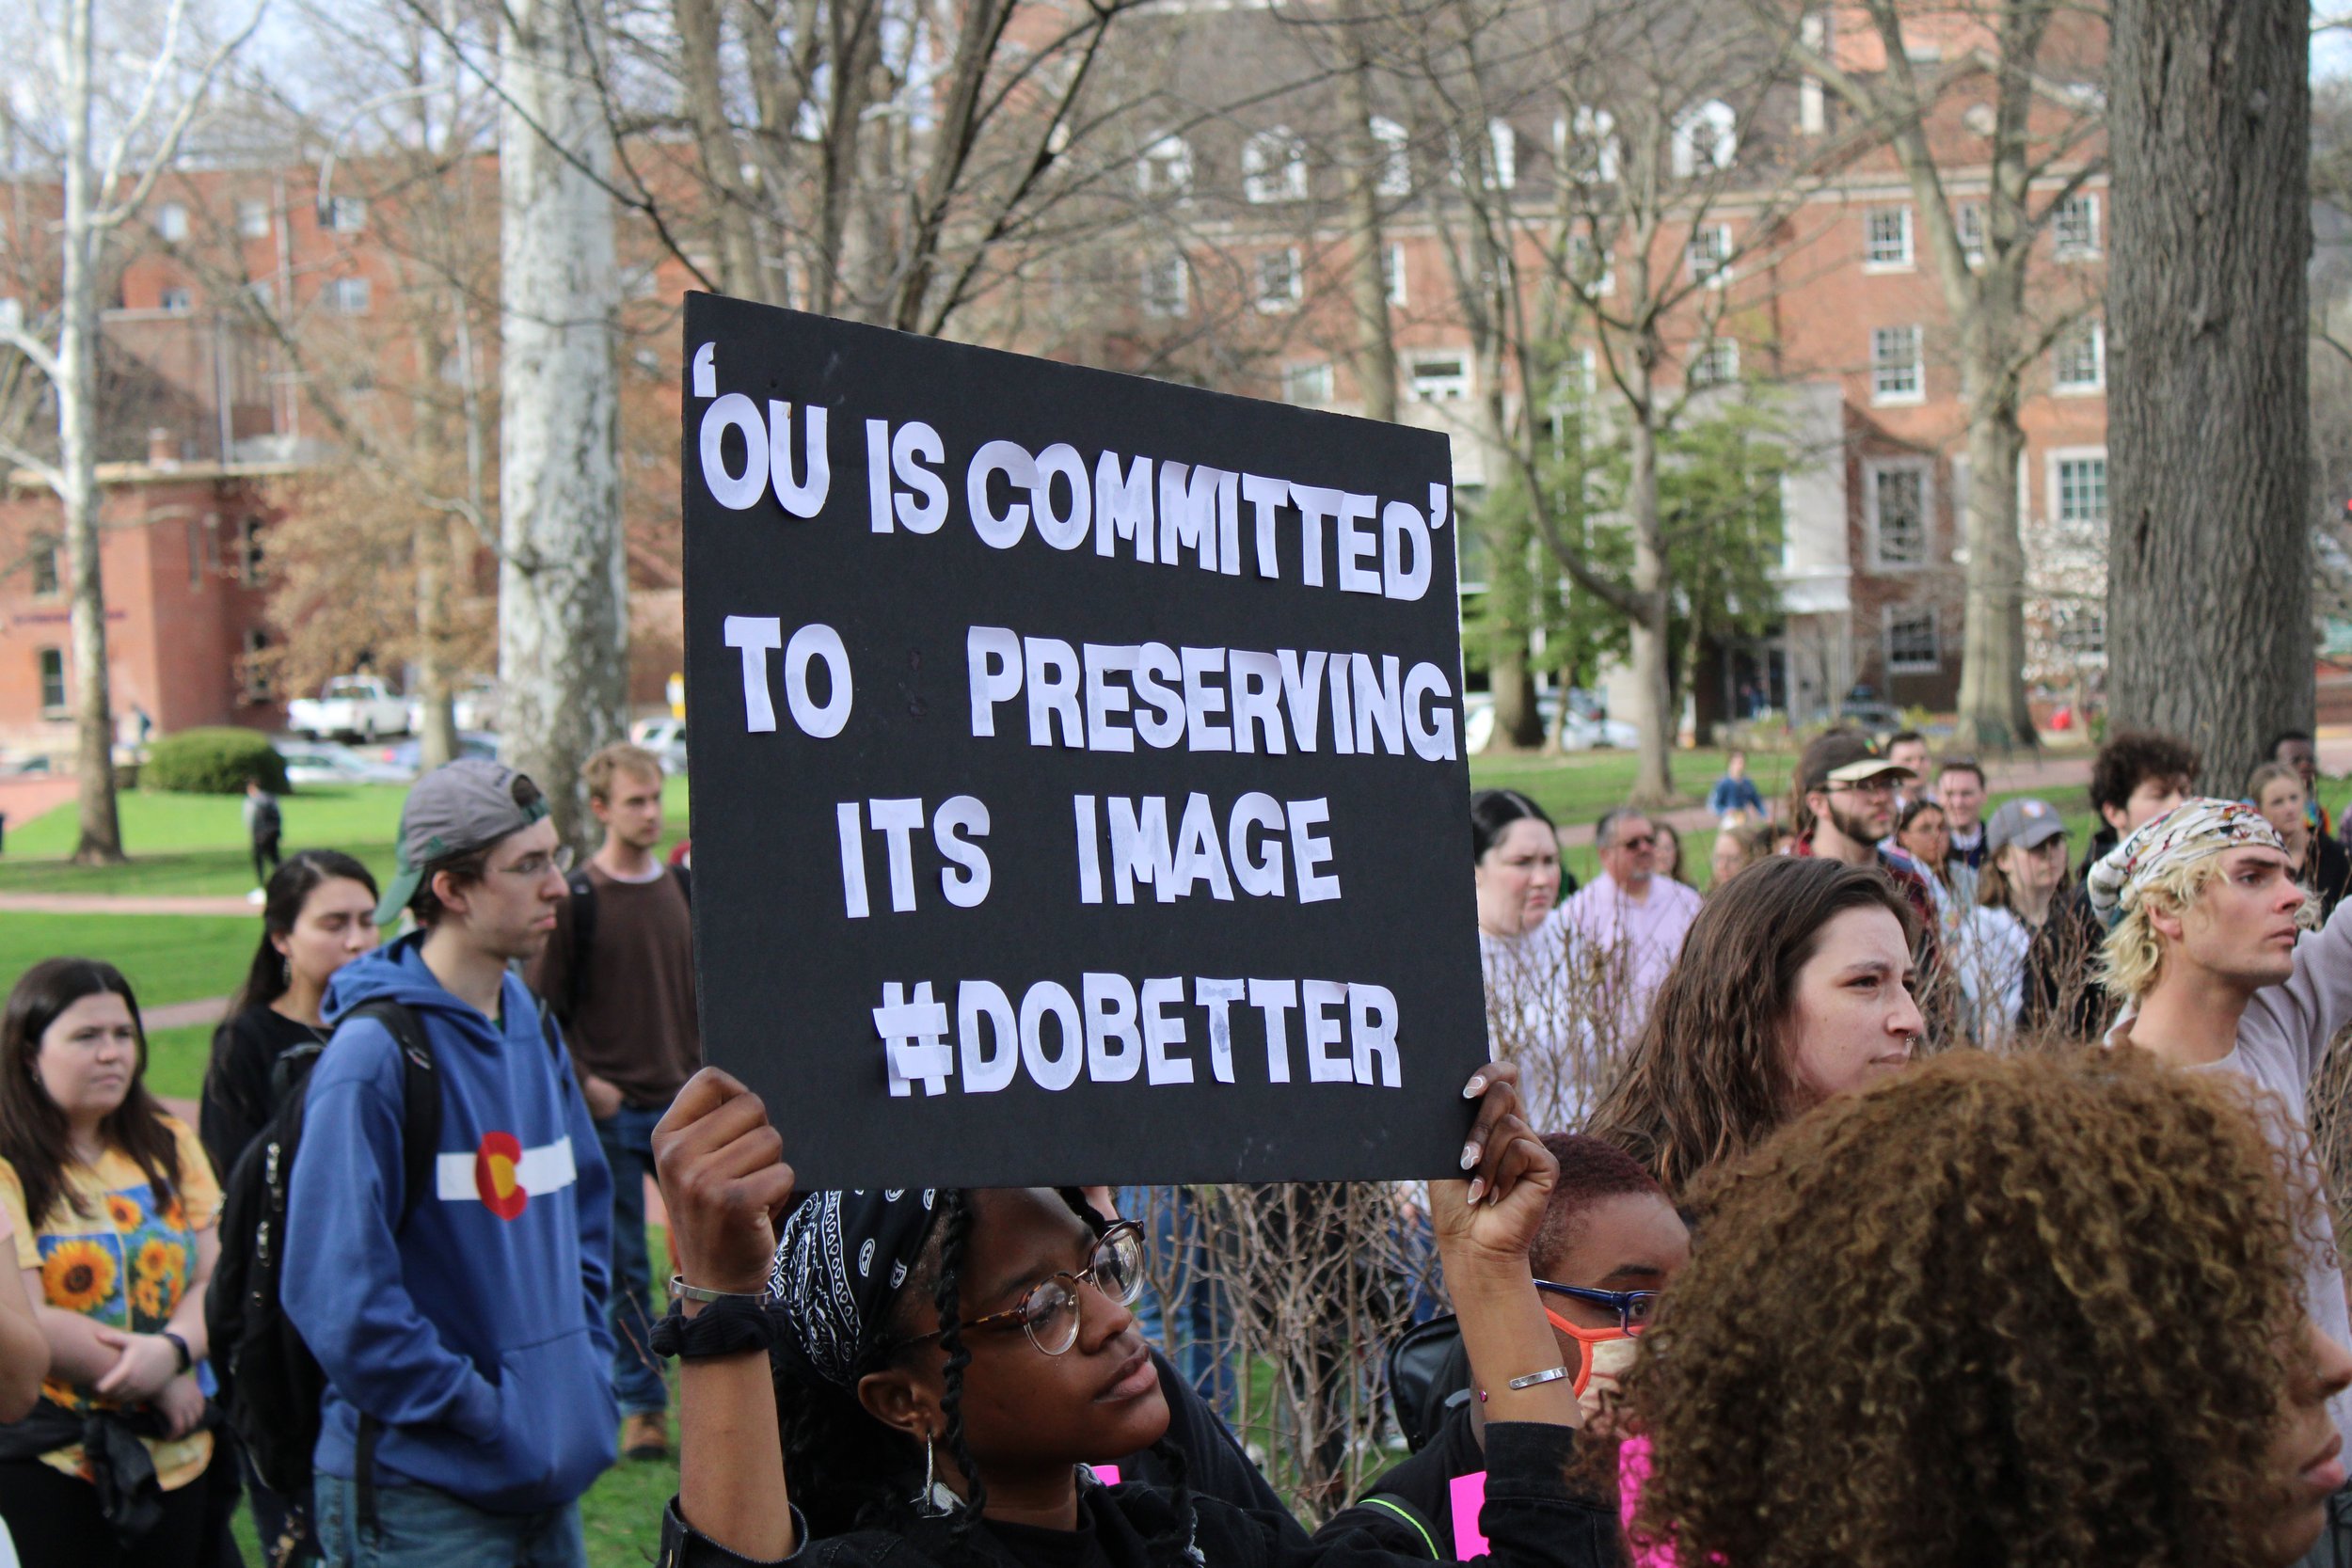  Diamond Brooks holds a sign that says “‘OU is committed’ to preserving its image #dobetter,” while listening to speakers. Photo by Izzy Keller. 